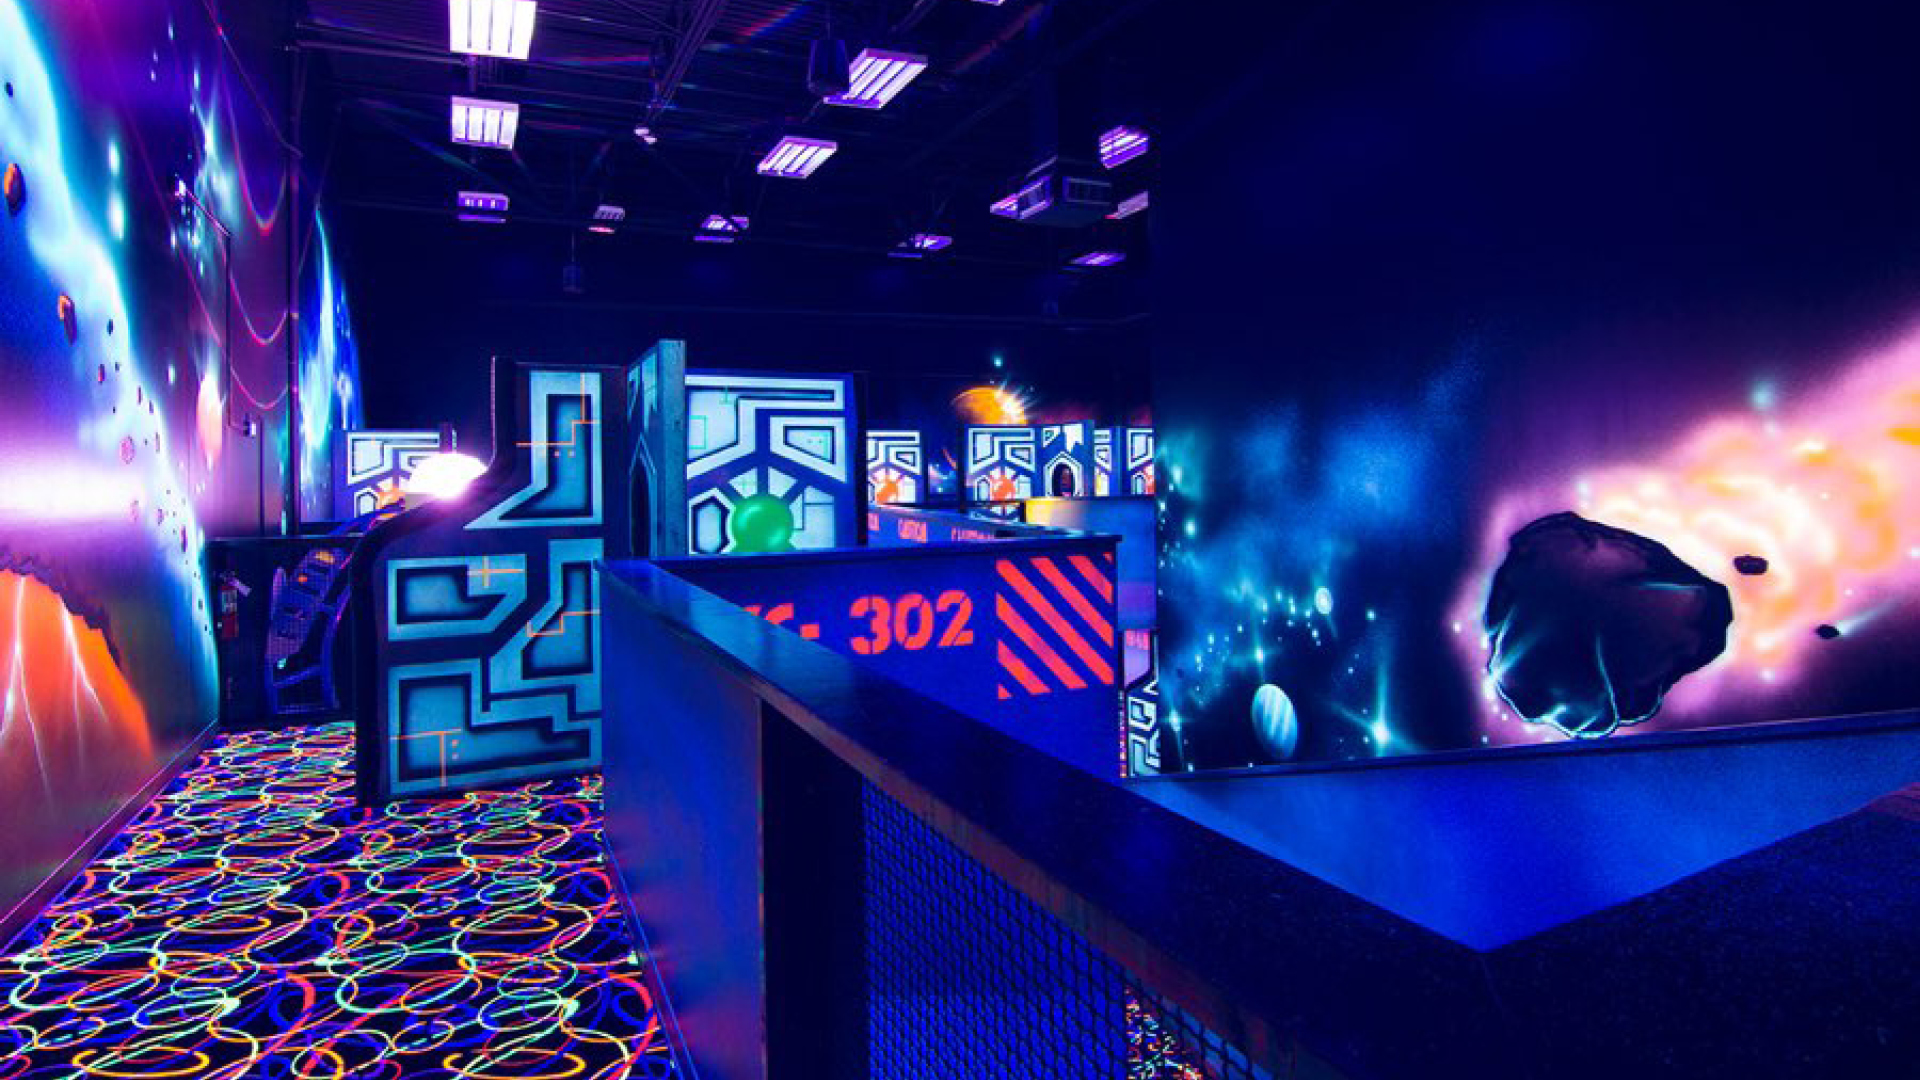 Two Level Laser Tag